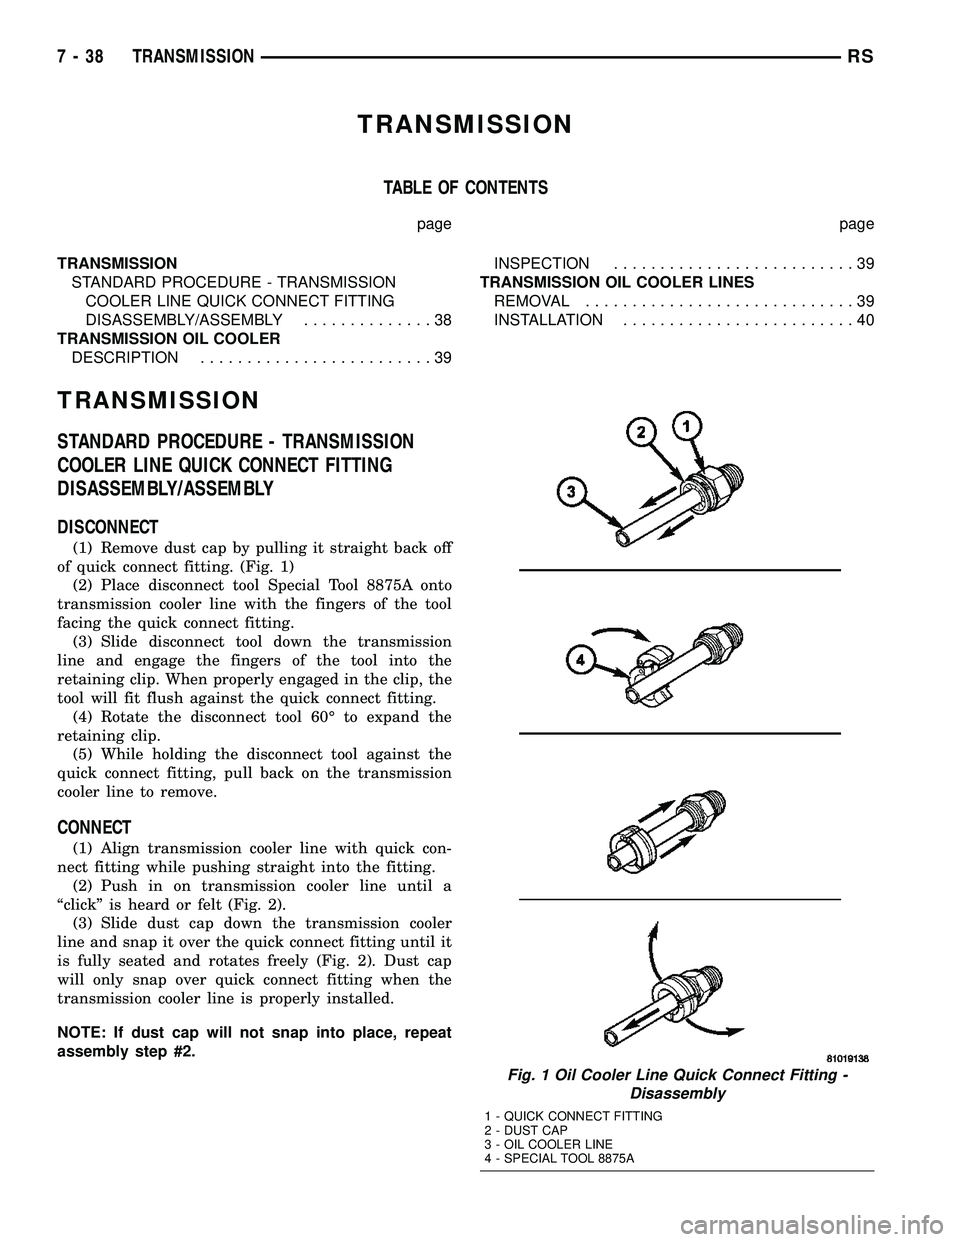 CHRYSLER VOYAGER 2005 Owners Manual TRANSMISSION
TABLE OF CONTENTS
page page
TRANSMISSION
STANDARD PROCEDURE - TRANSMISSION
COOLER LINE QUICK CONNECT FITTING
DISASSEMBLY/ASSEMBLY..............38
TRANSMISSION OIL COOLER
DESCRIPTION......